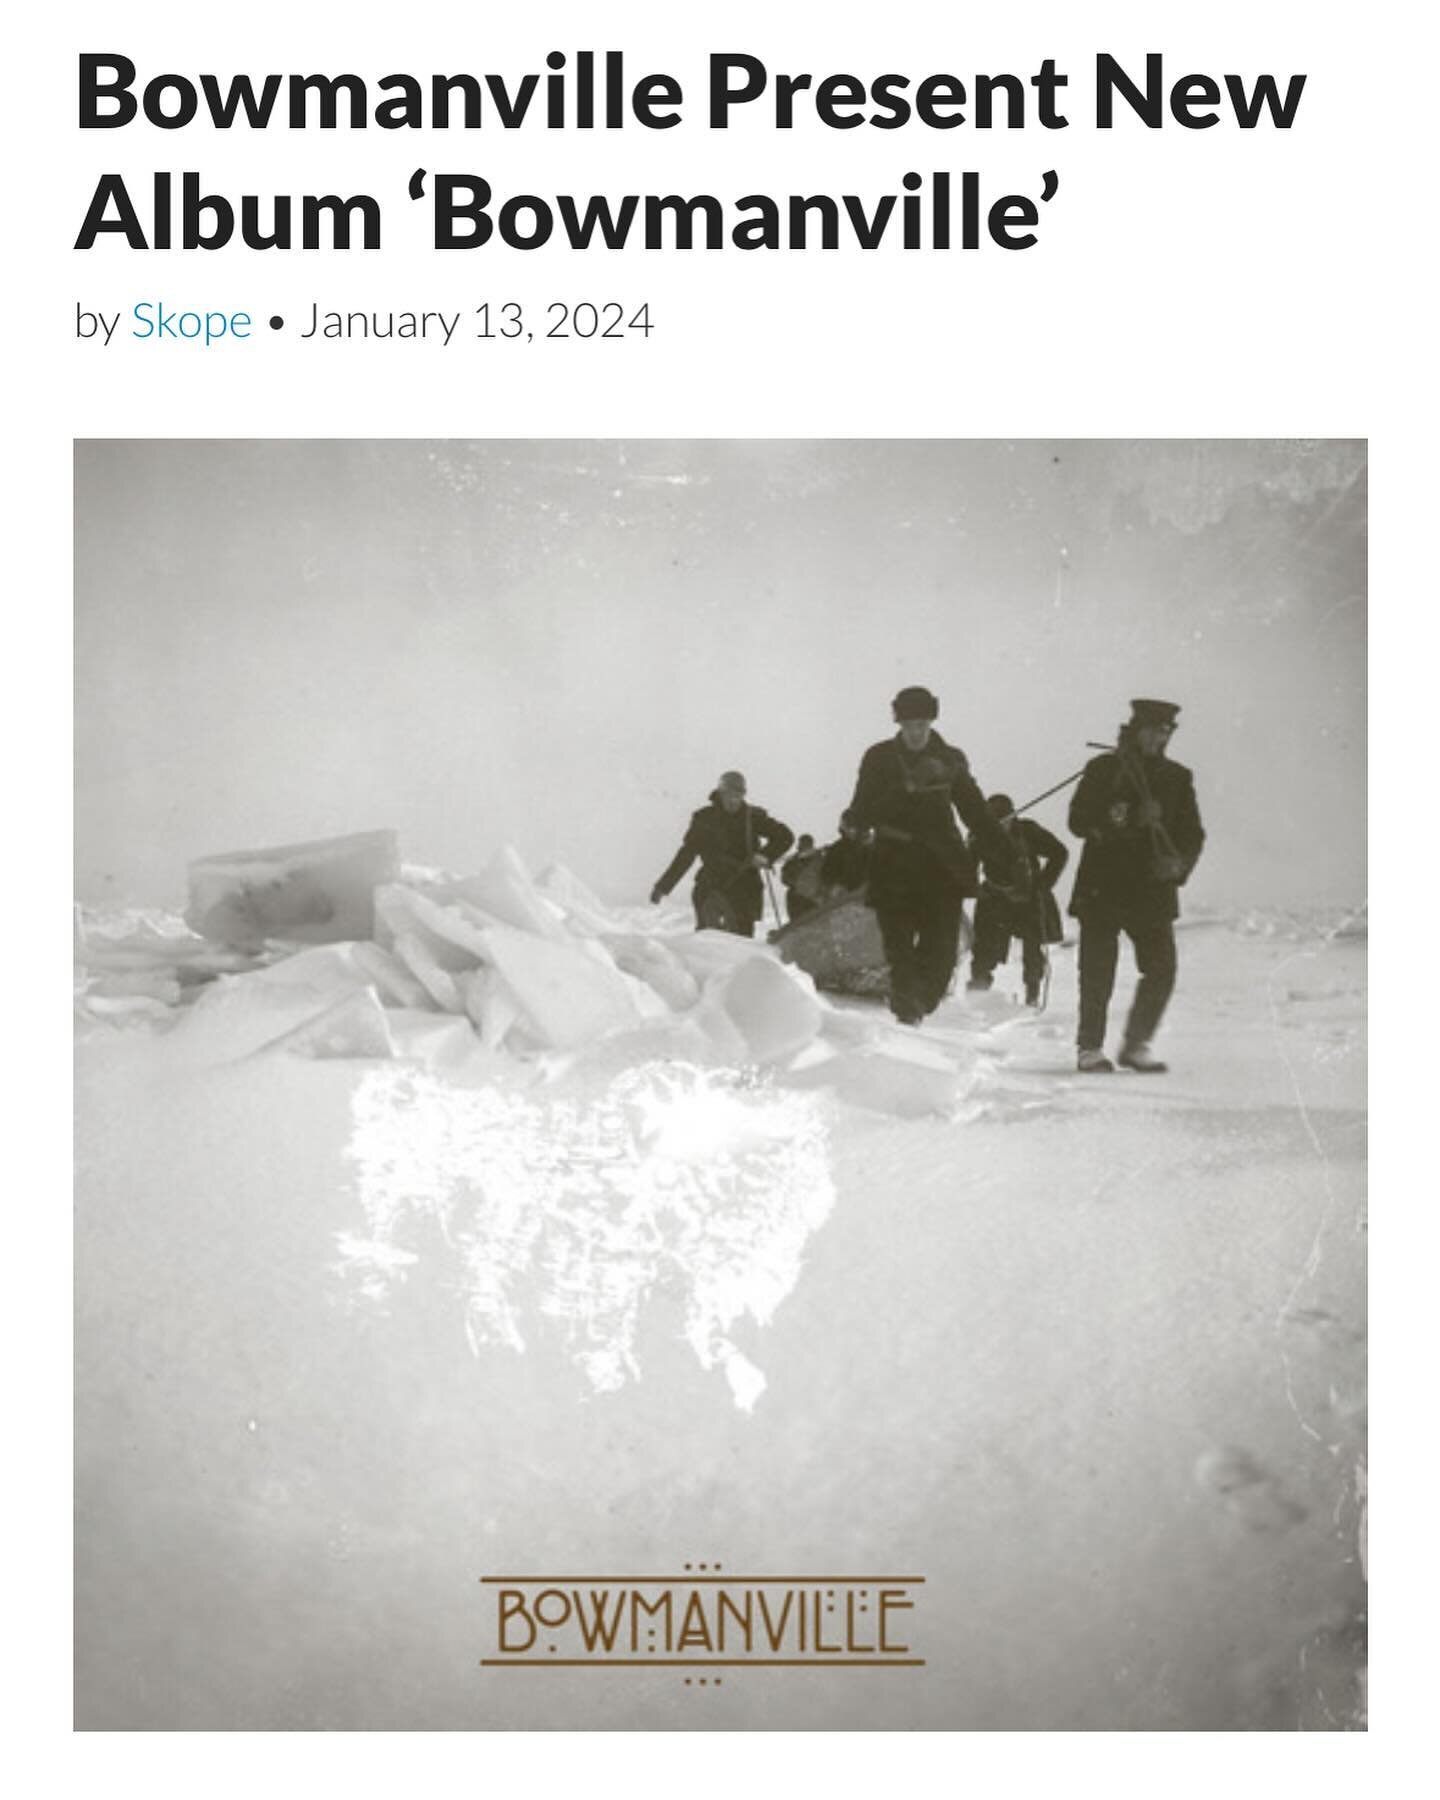 Check out this stellar review of our debut album from @skopemag